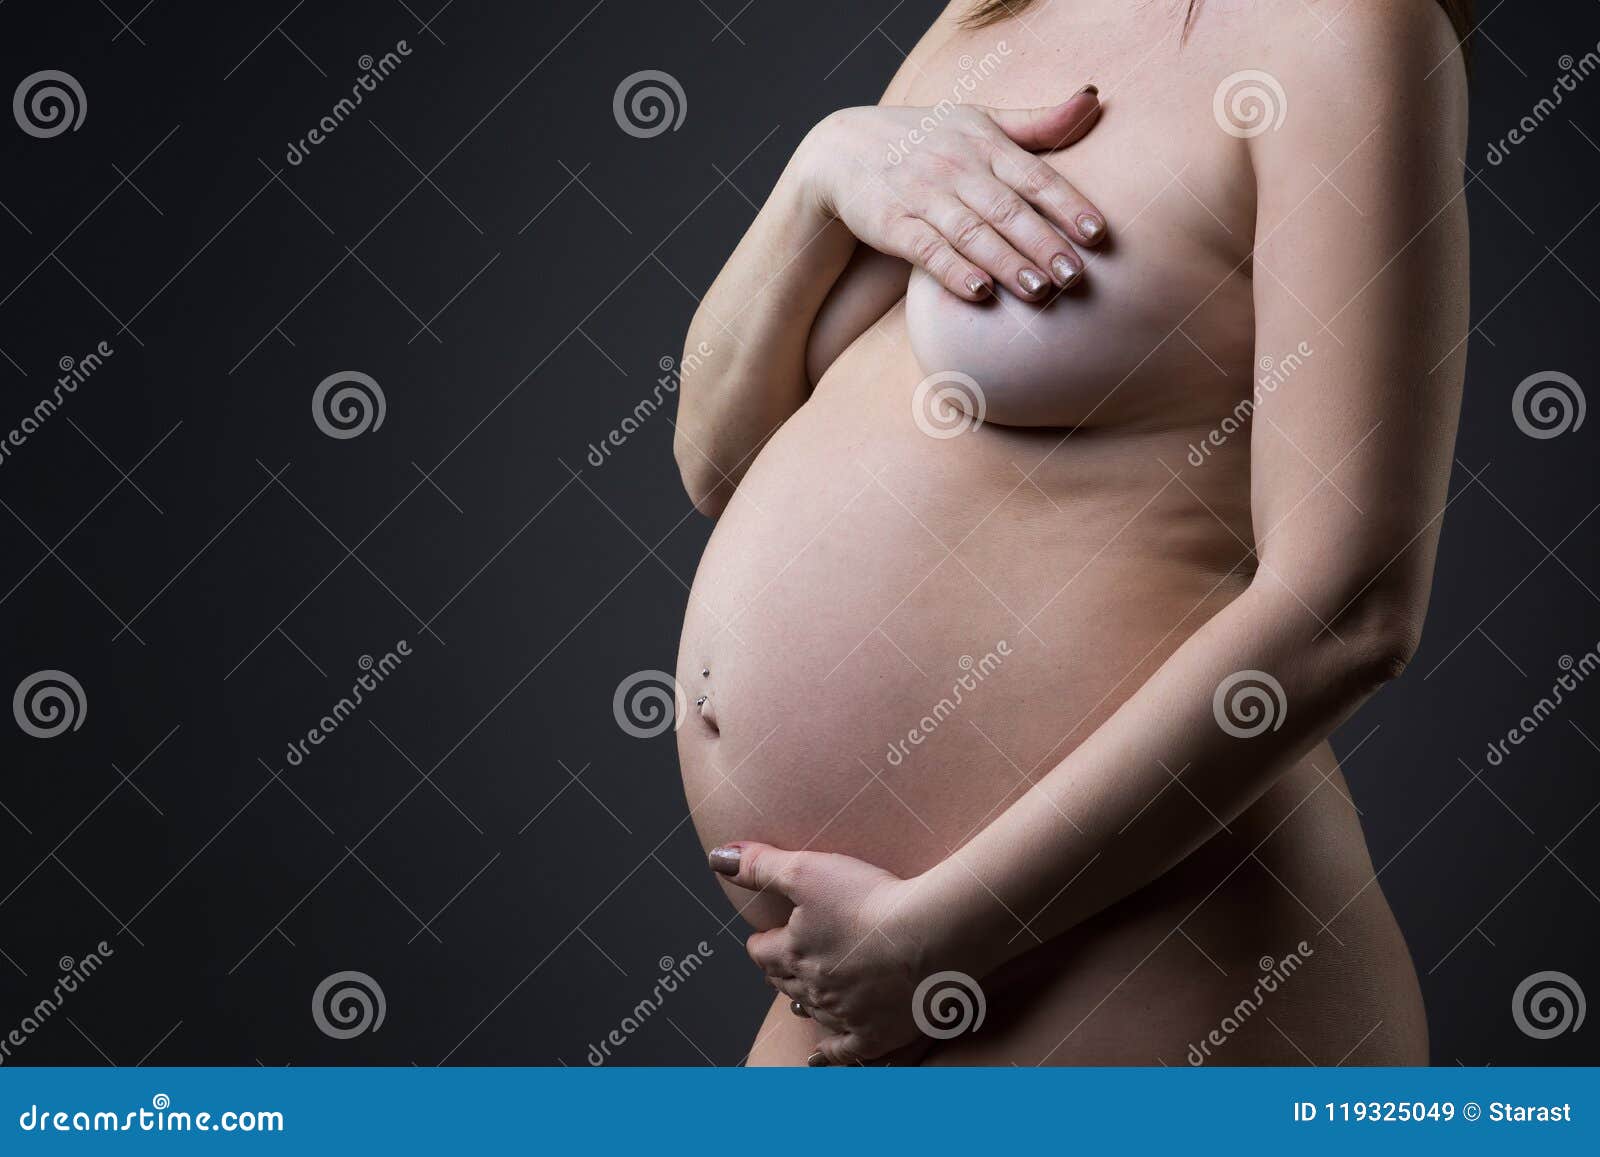 Embrace the beauty of pregnancy nude photos of a 9 month pregnant woman pic